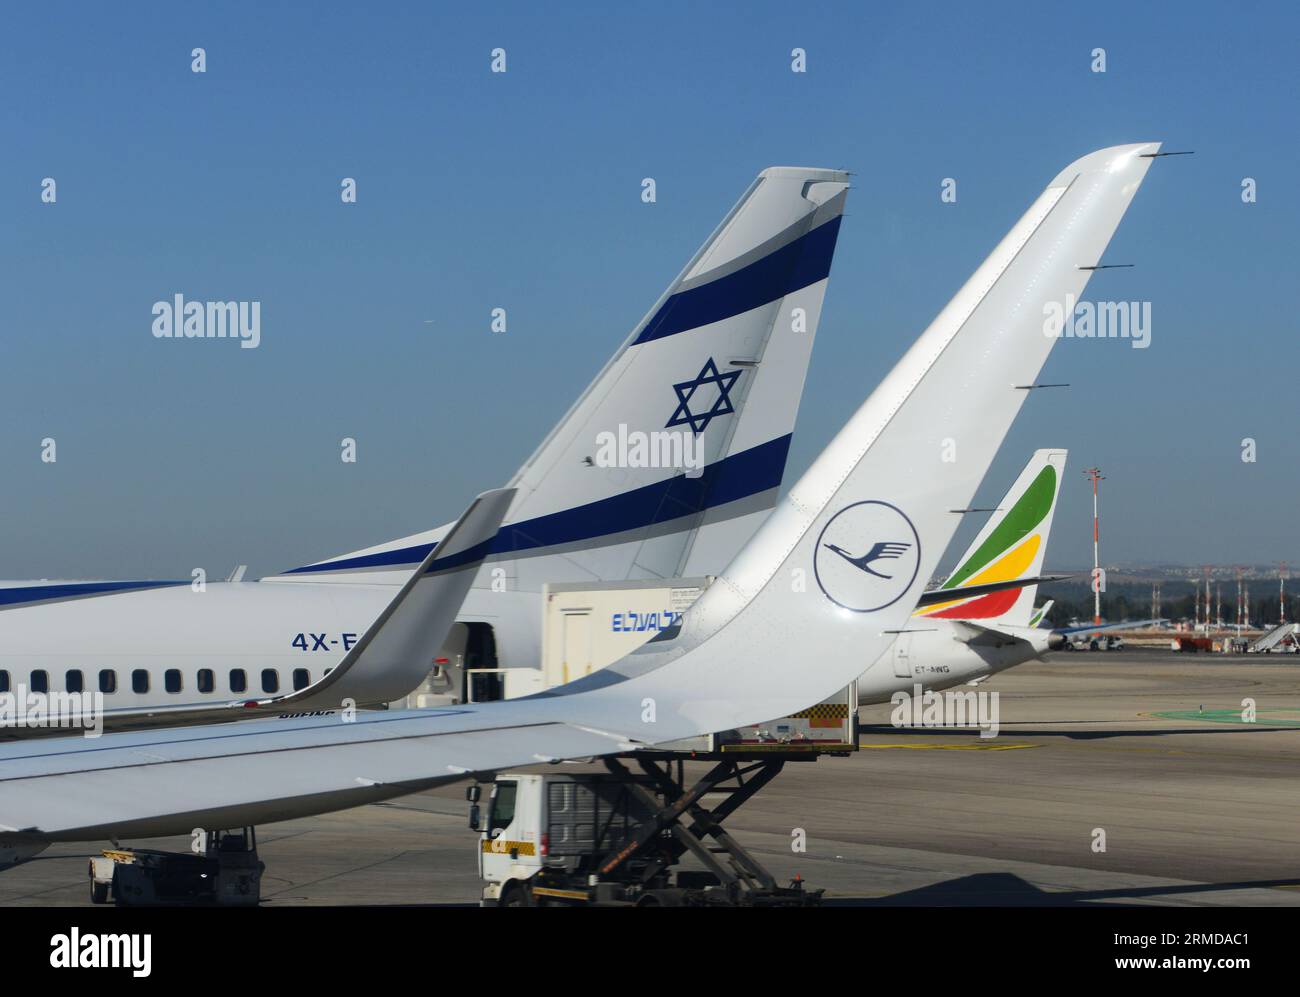 Lufthansa, ElAl and Ethiopian airlines airplanes on the tarmac at Ben Gurion international airport, Israel. Stock Photo